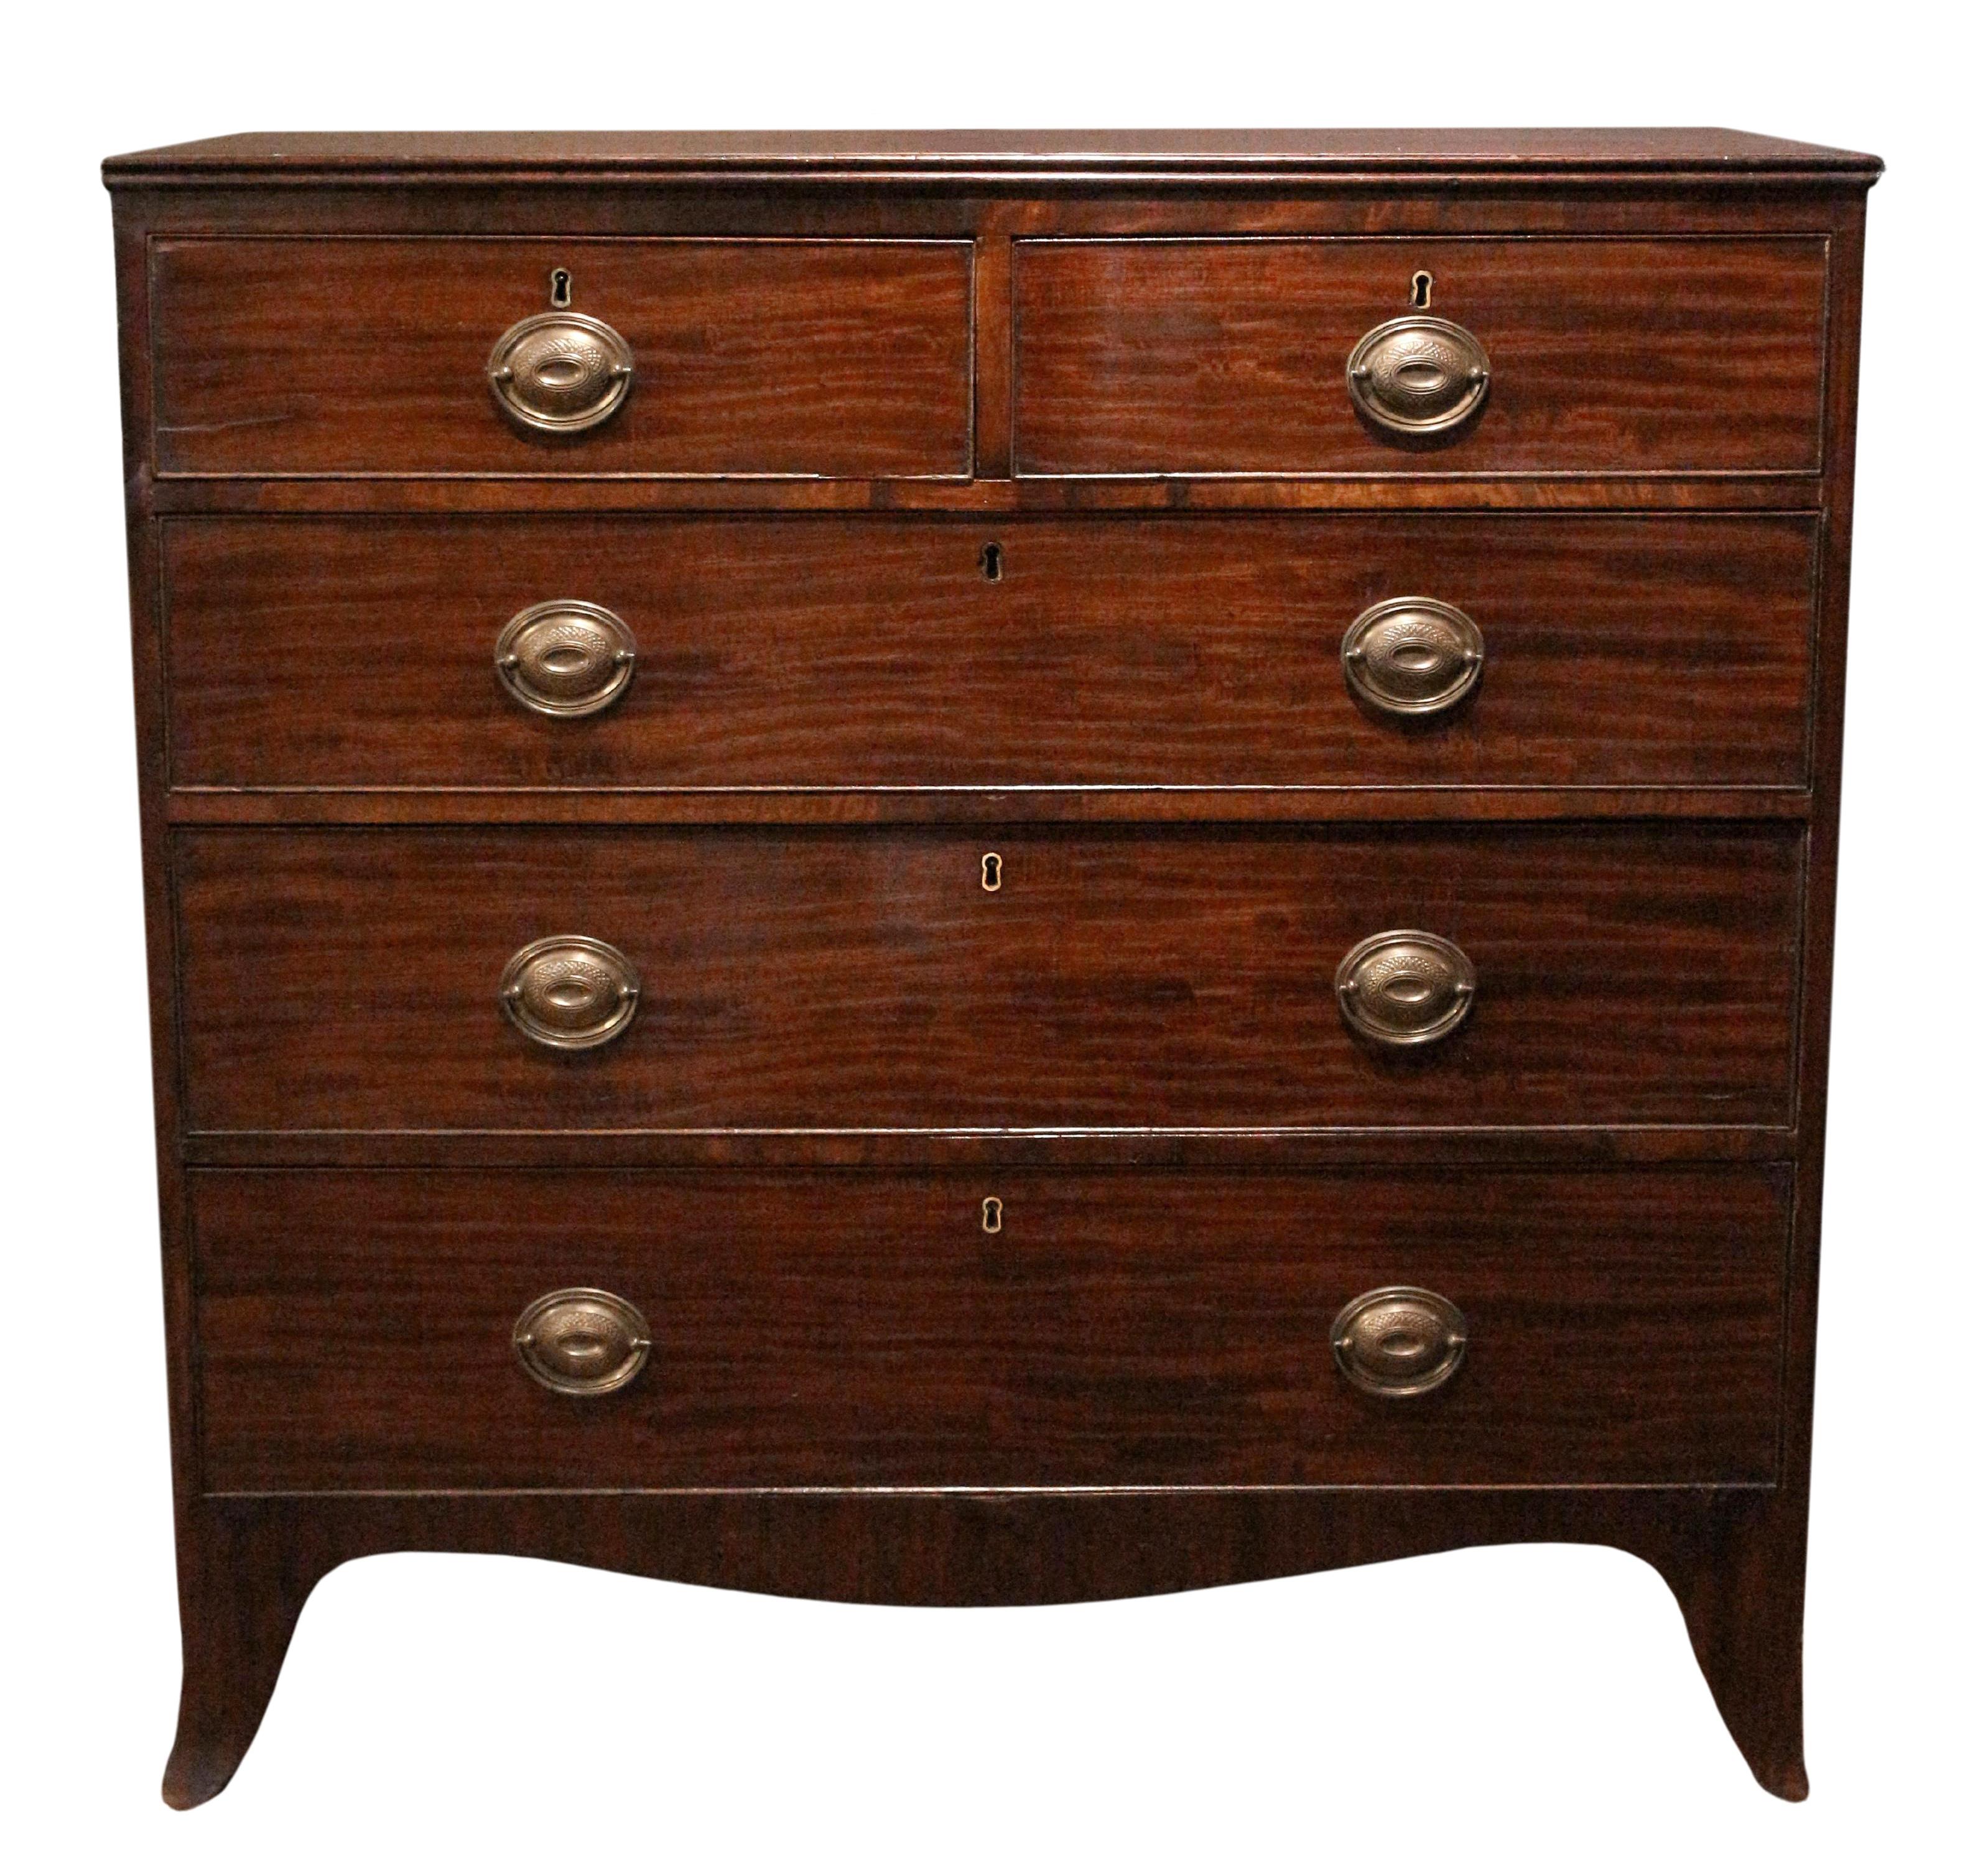 English George III period straight front chest of drawers, c.1800. 2 over 3 drawer form, raised on French splay feet. Choice veneers. Reproduction pulls in original holes (plus plugs from other previous hardware). Housekeeping repairs over the